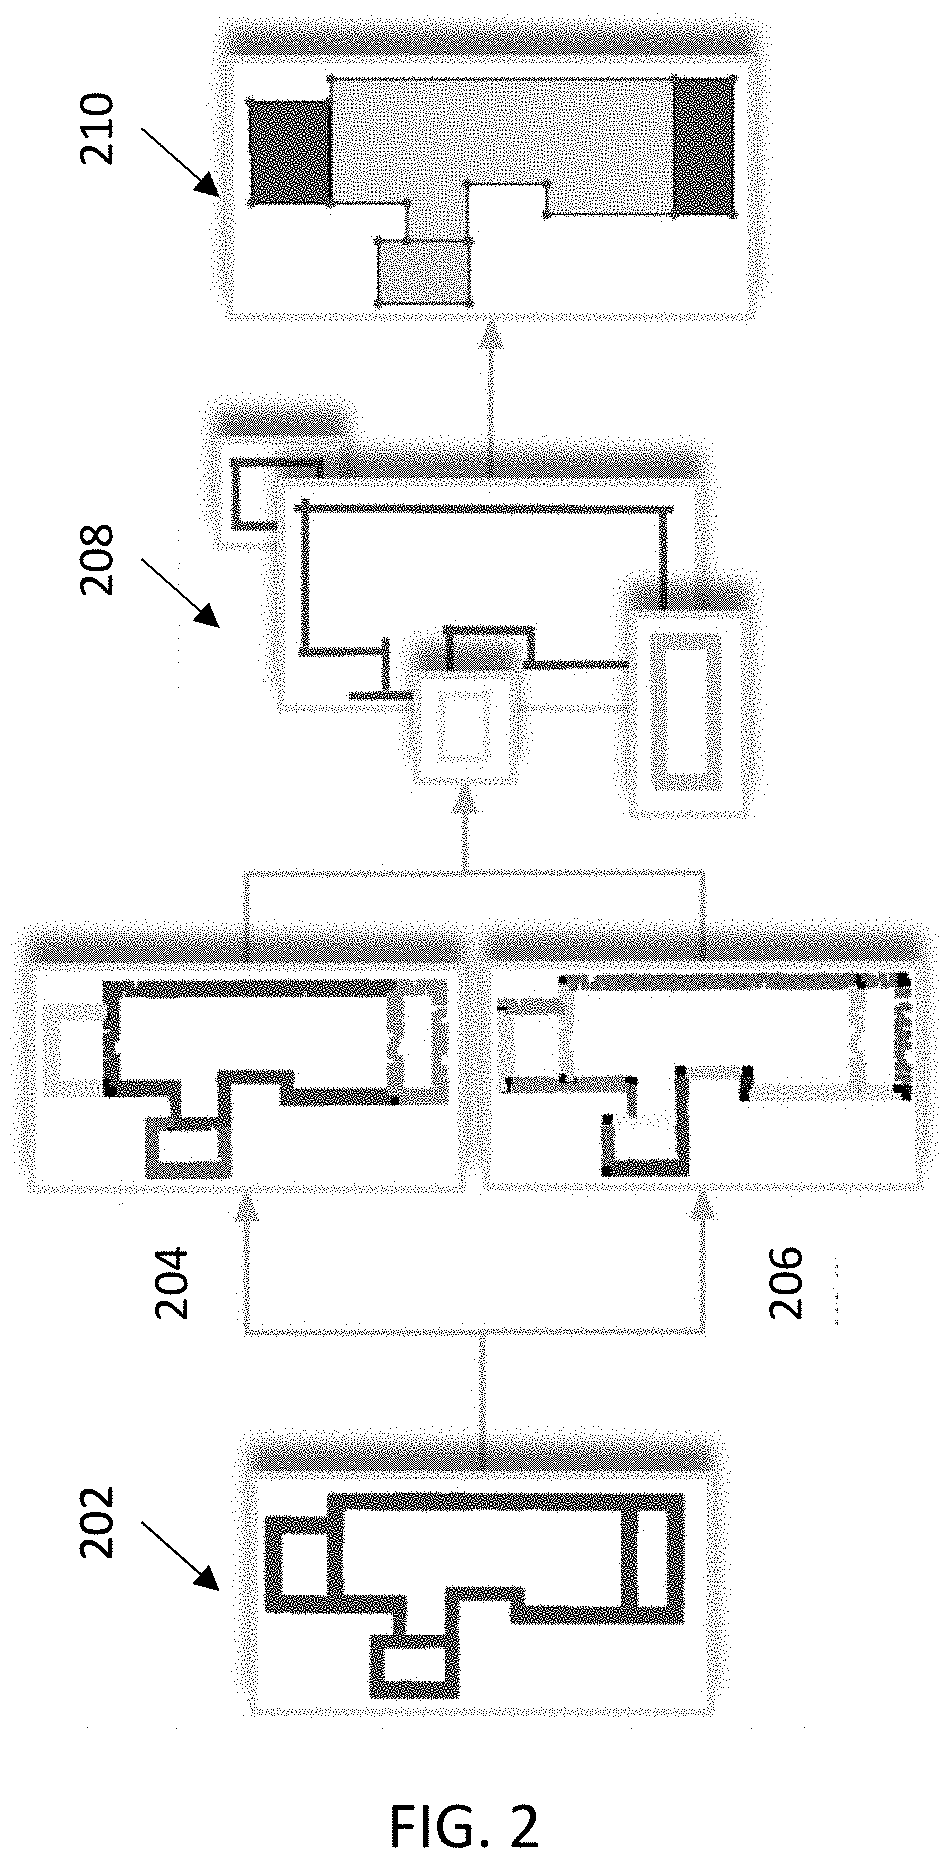 Systems and methods for efficient floorplan generation from 3D scans of indoor scenes